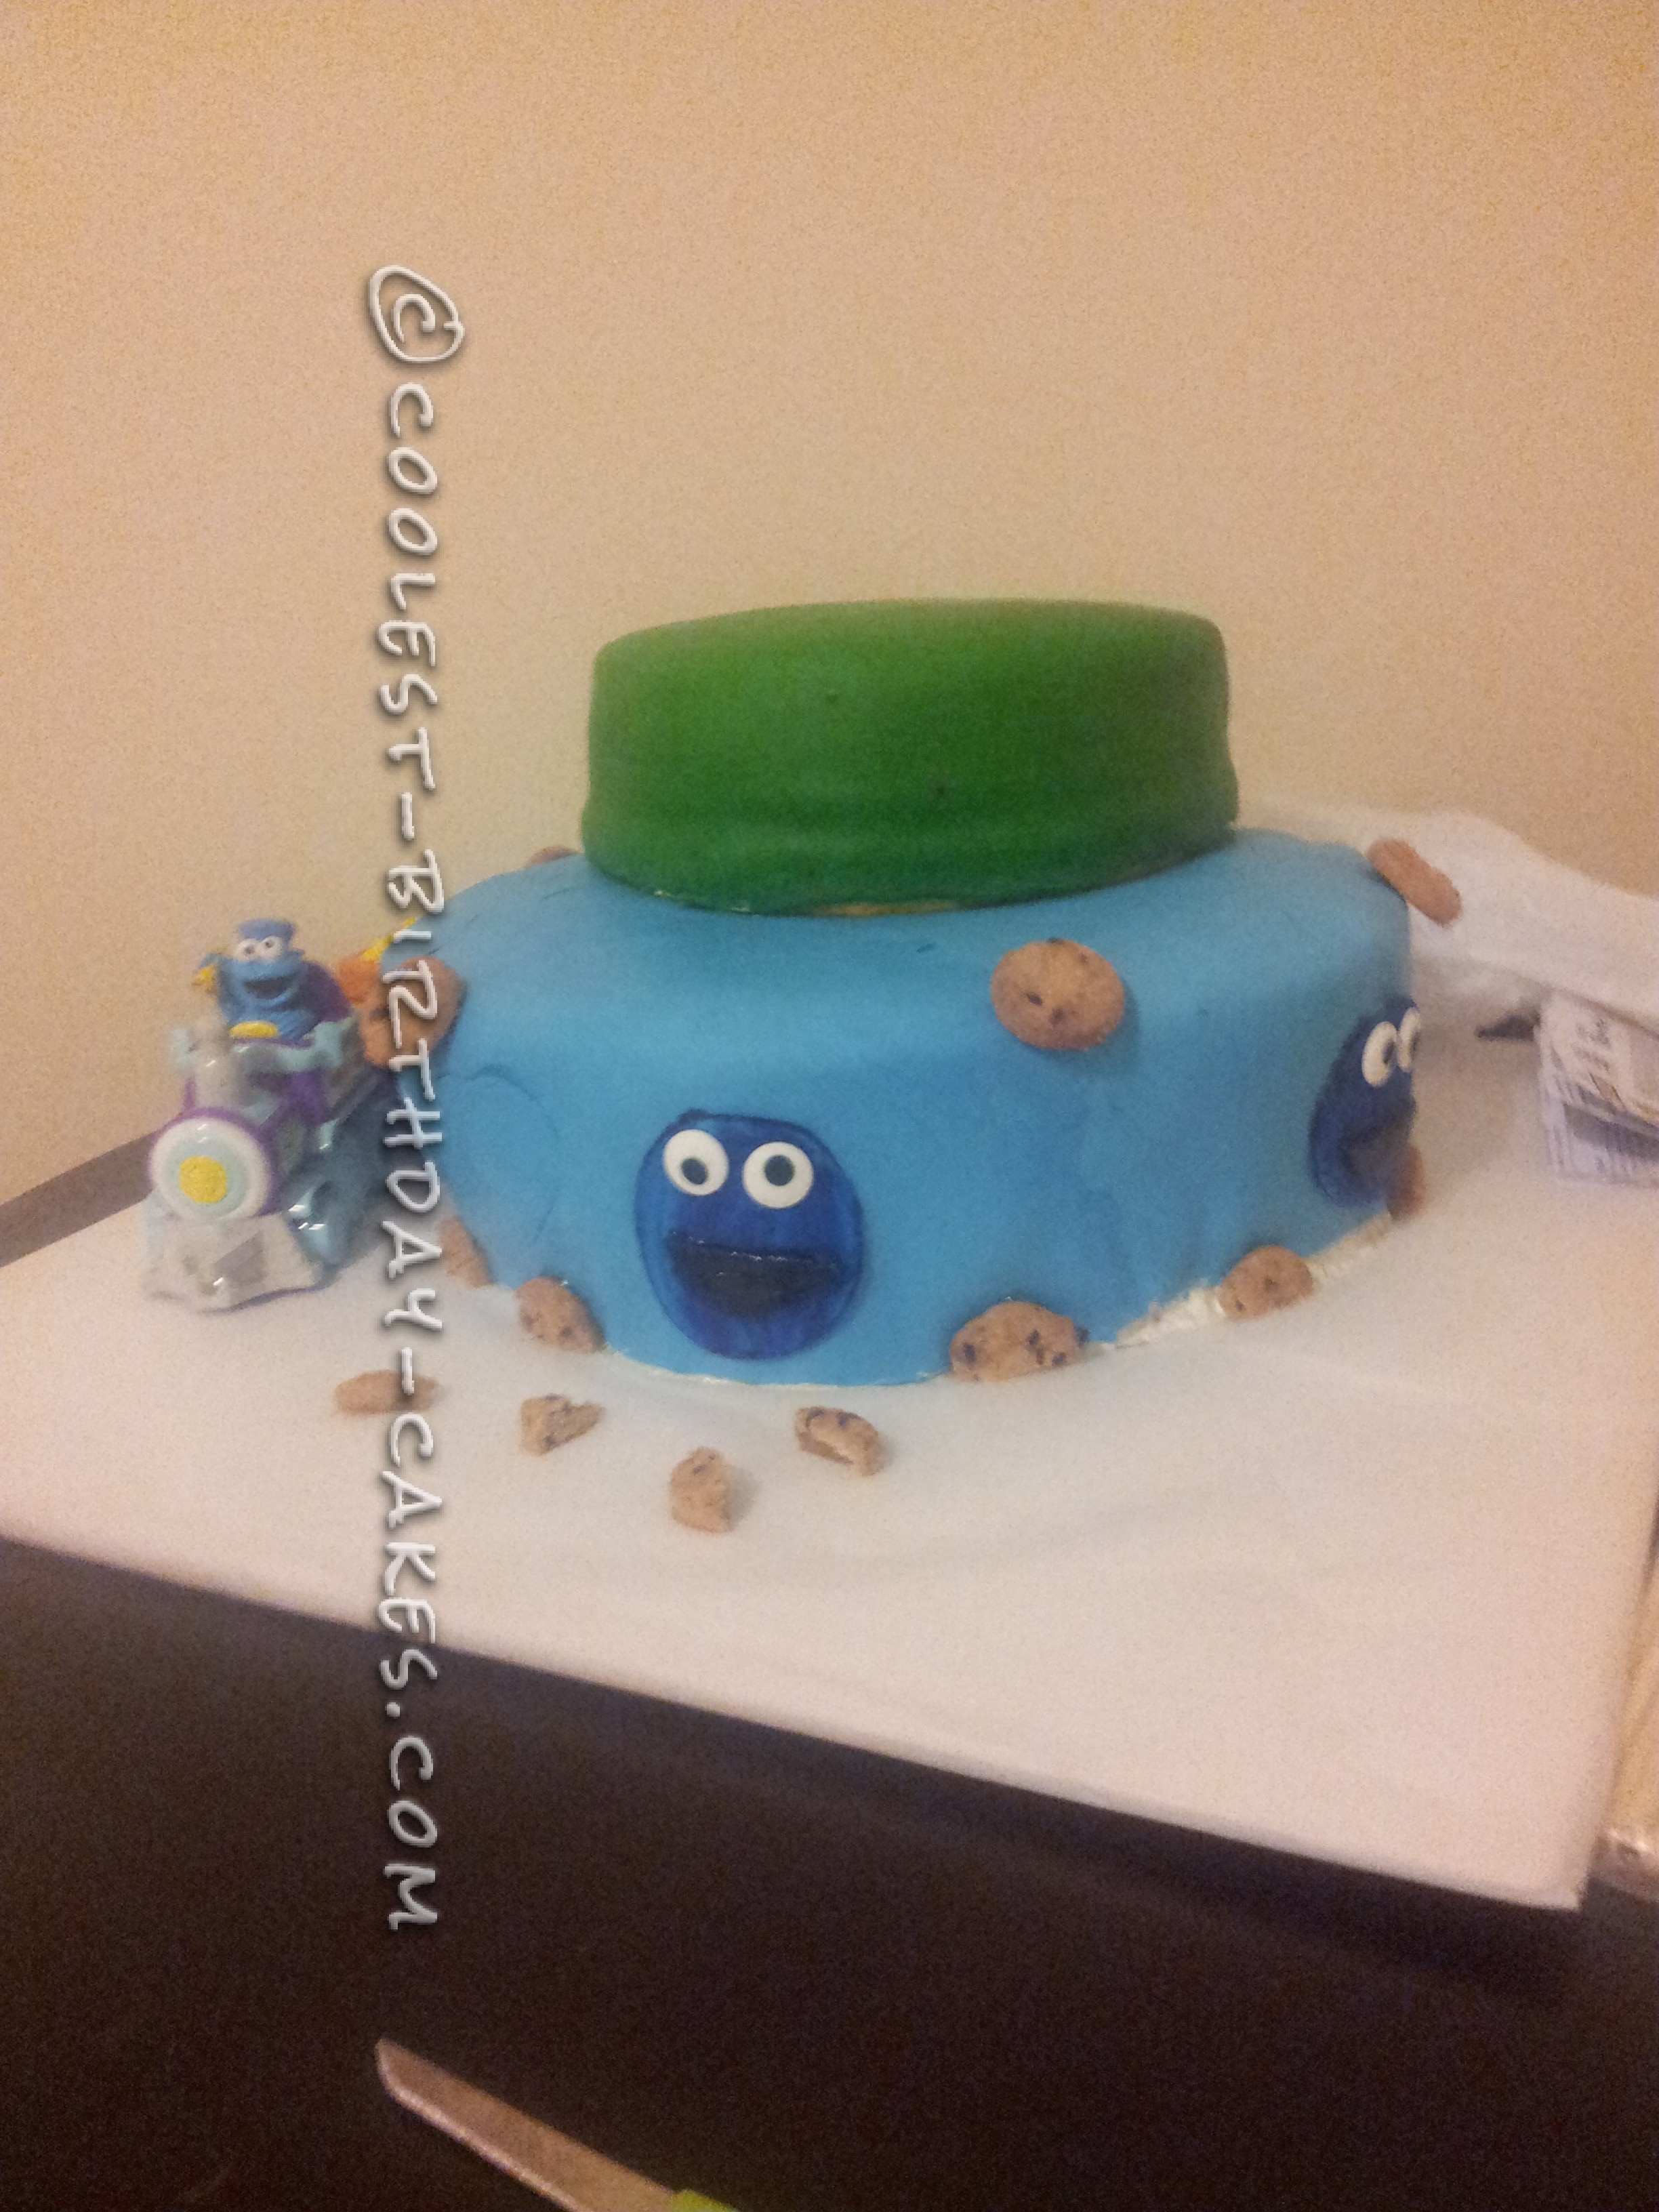 Awesome Sesame Street Birthday Cake for a 2 Year Old Boy